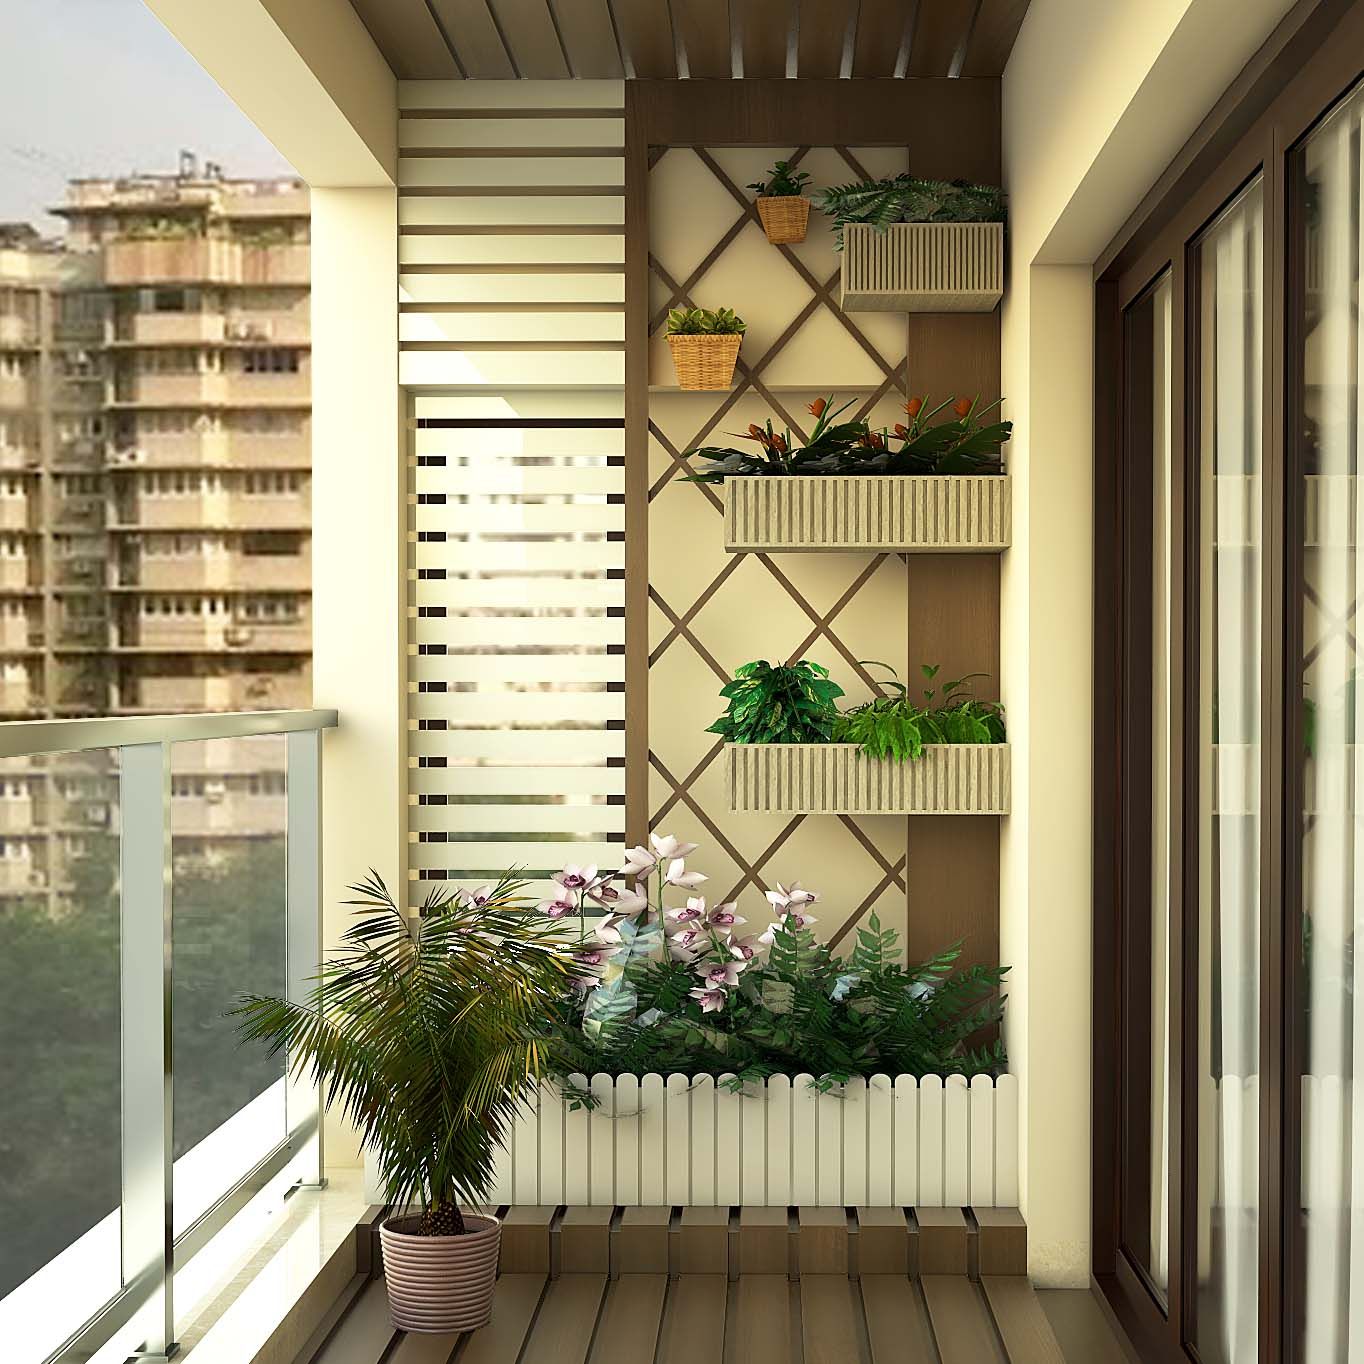 Spacious Home Balcony Design With Wall Rafters